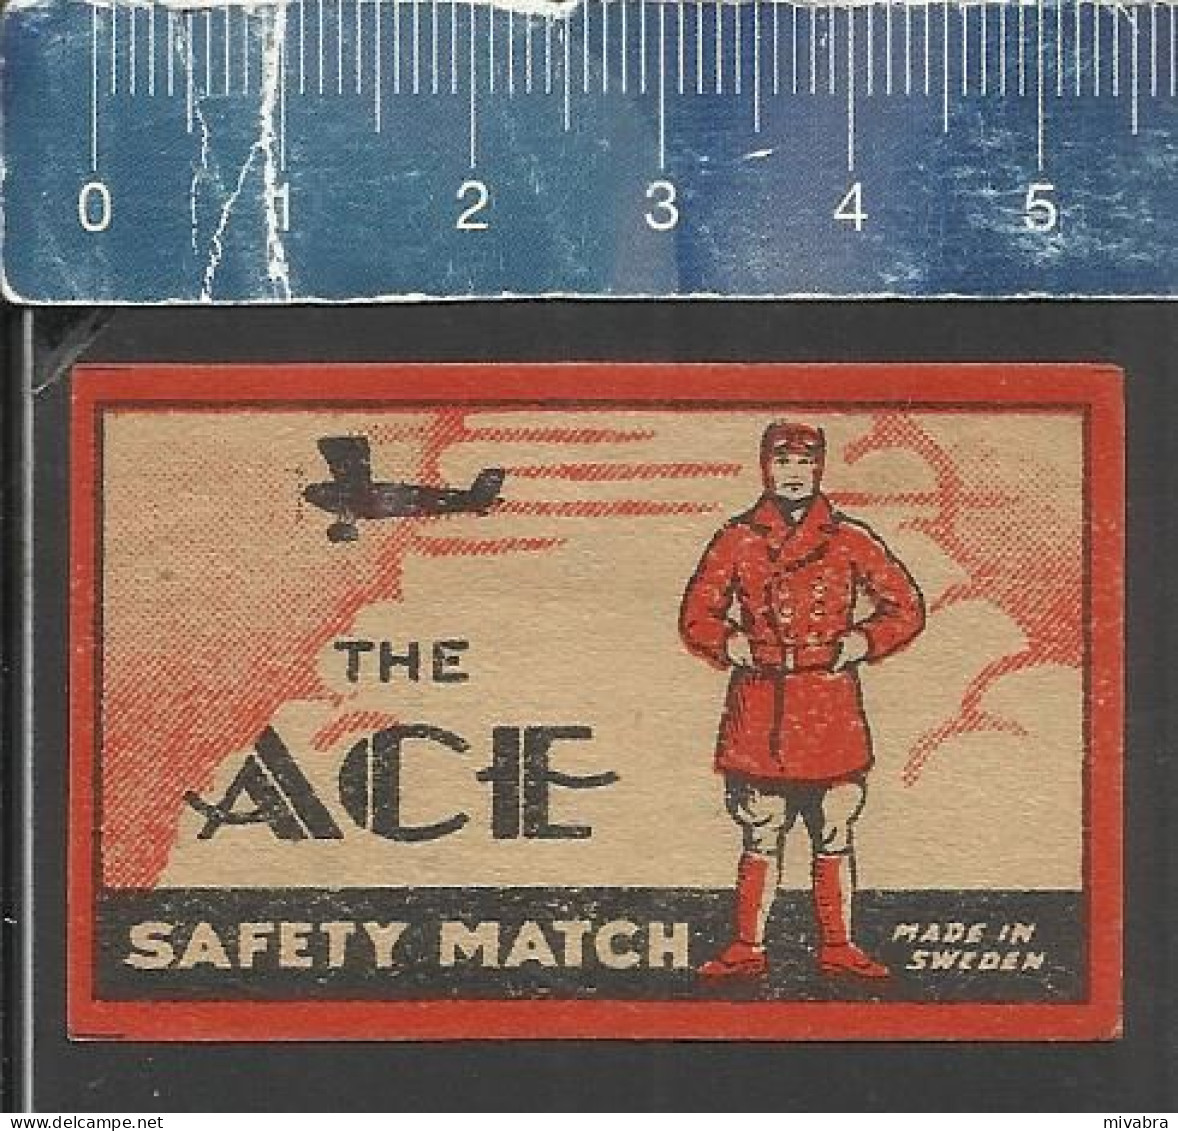 THE ACE (flying Ace Fighter Ace Or Air Ace Is A Military Aviator Shooting Down Enemy Aircraft) OLD MATCHBOX LABEL SWEDEN - Boites D'allumettes - Etiquettes